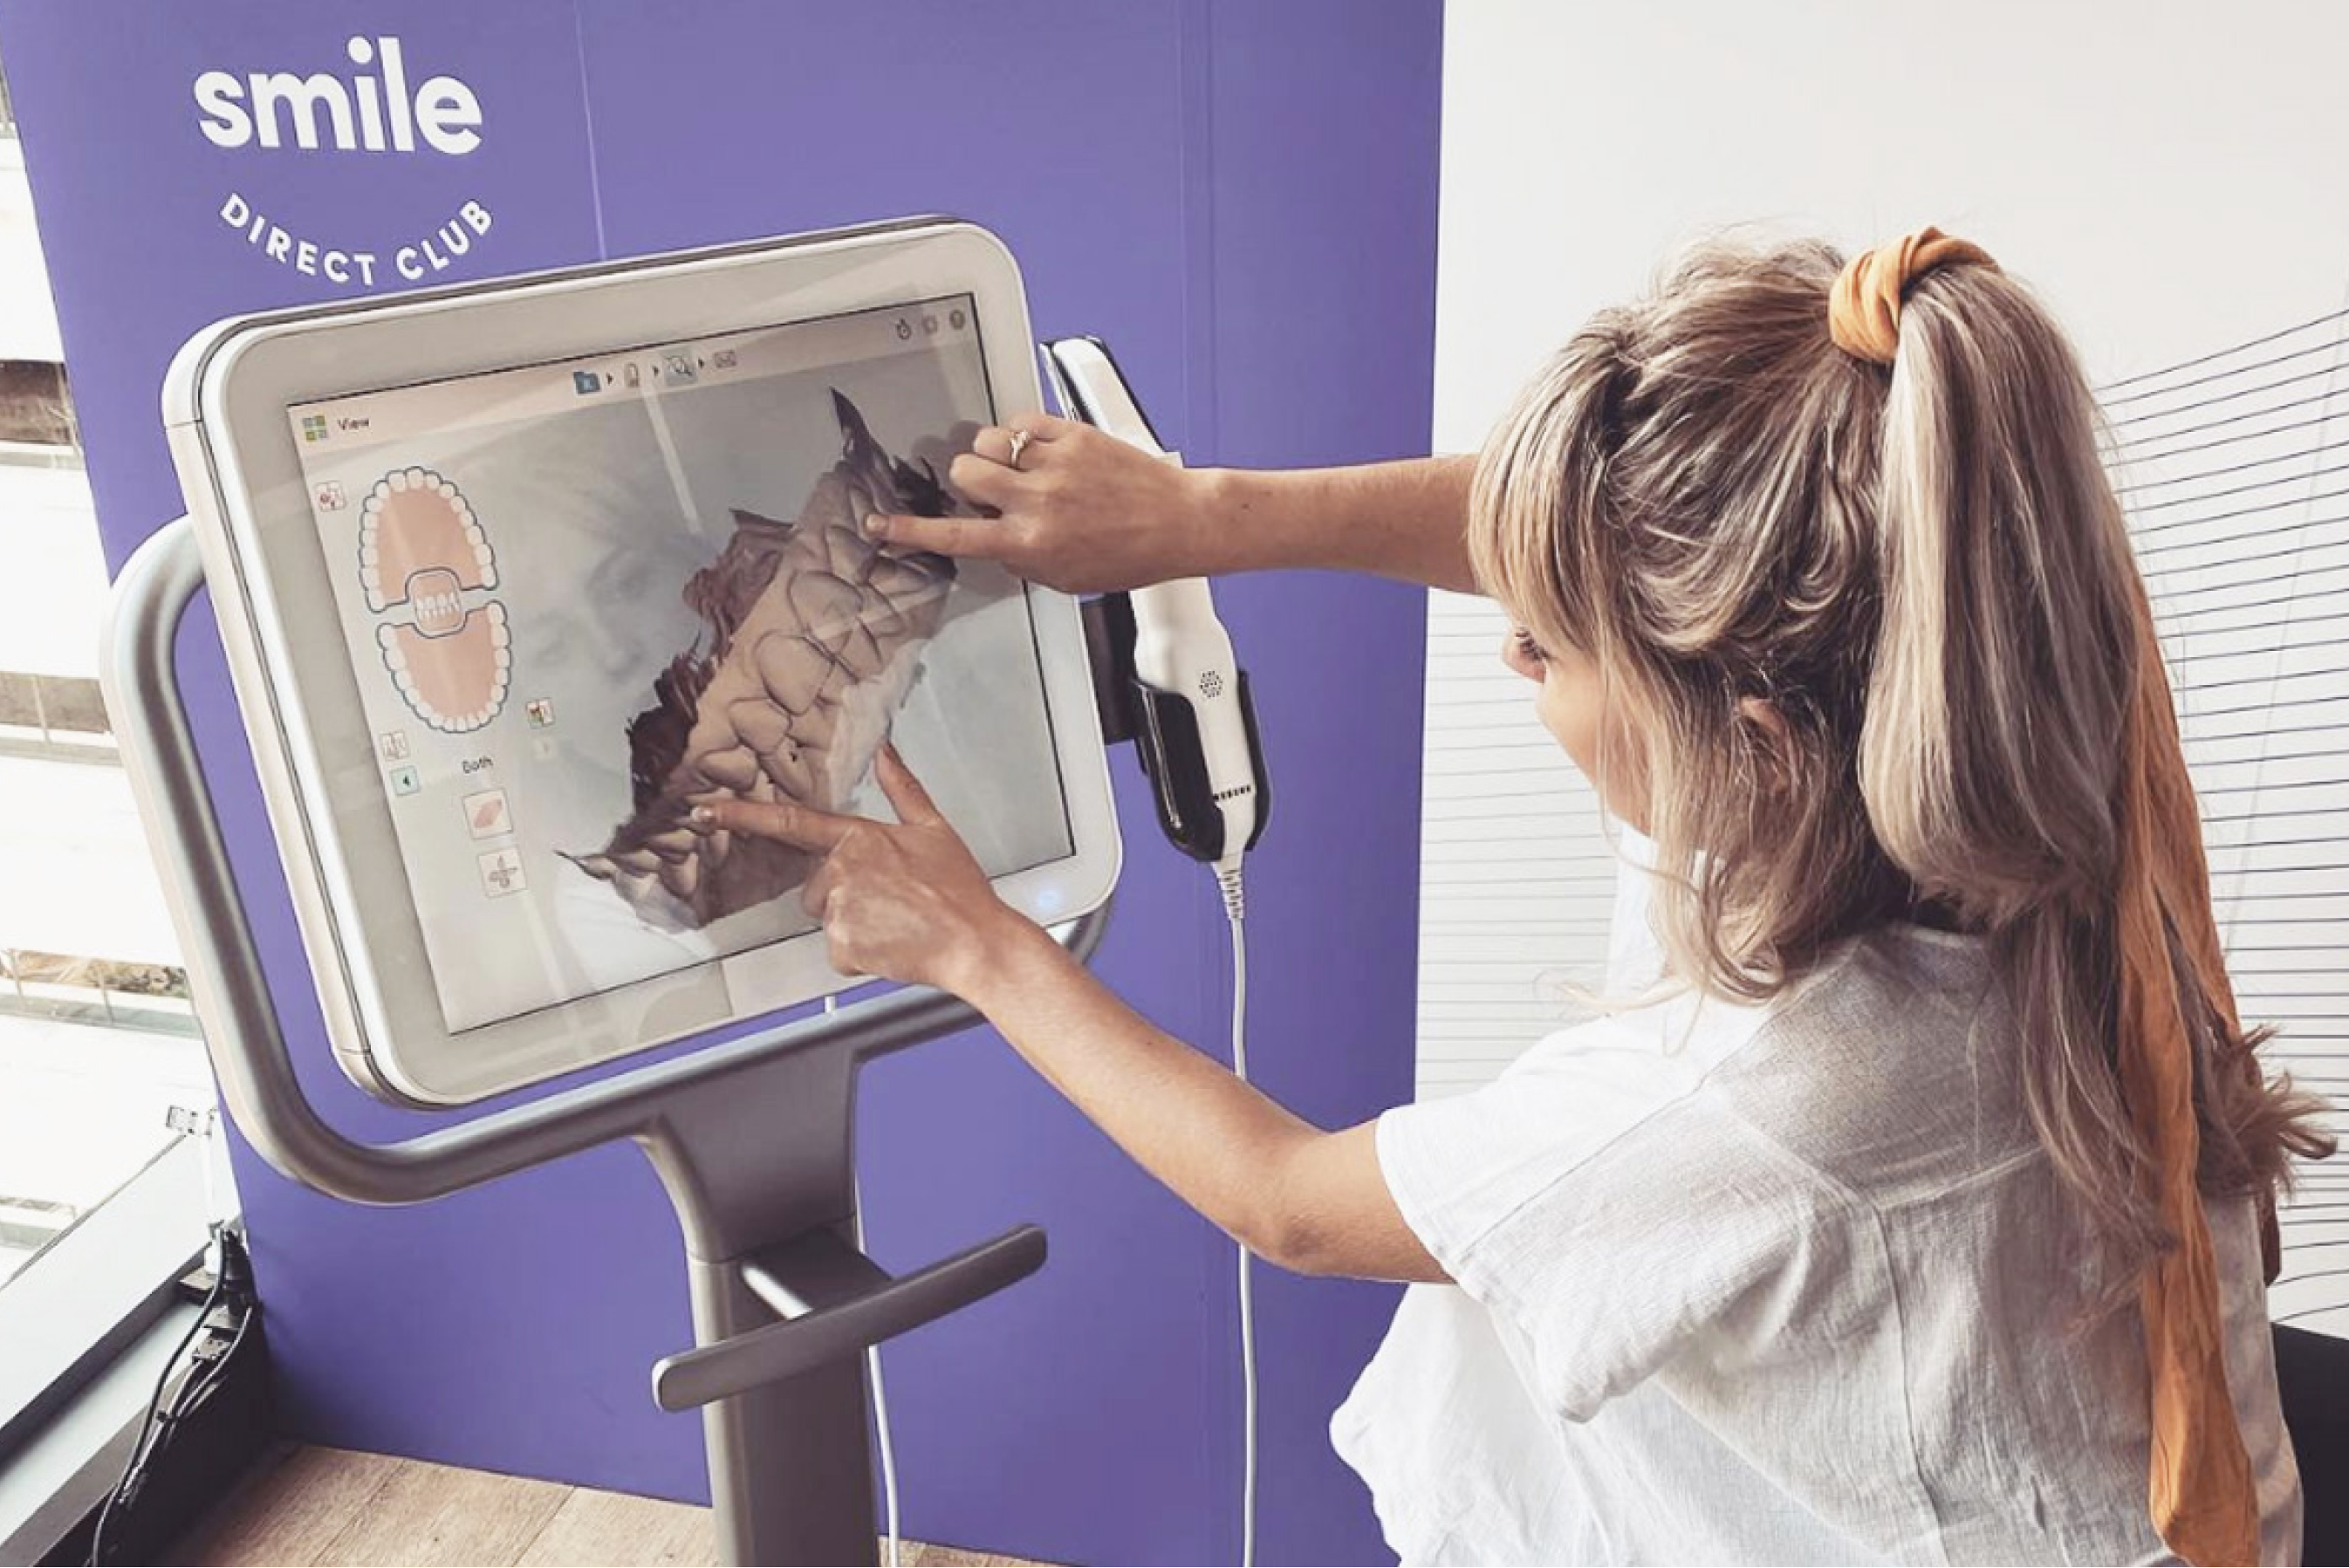 woman-looking-at-3D-image-scan-in-a-touch-screen-in-a-Smileshop